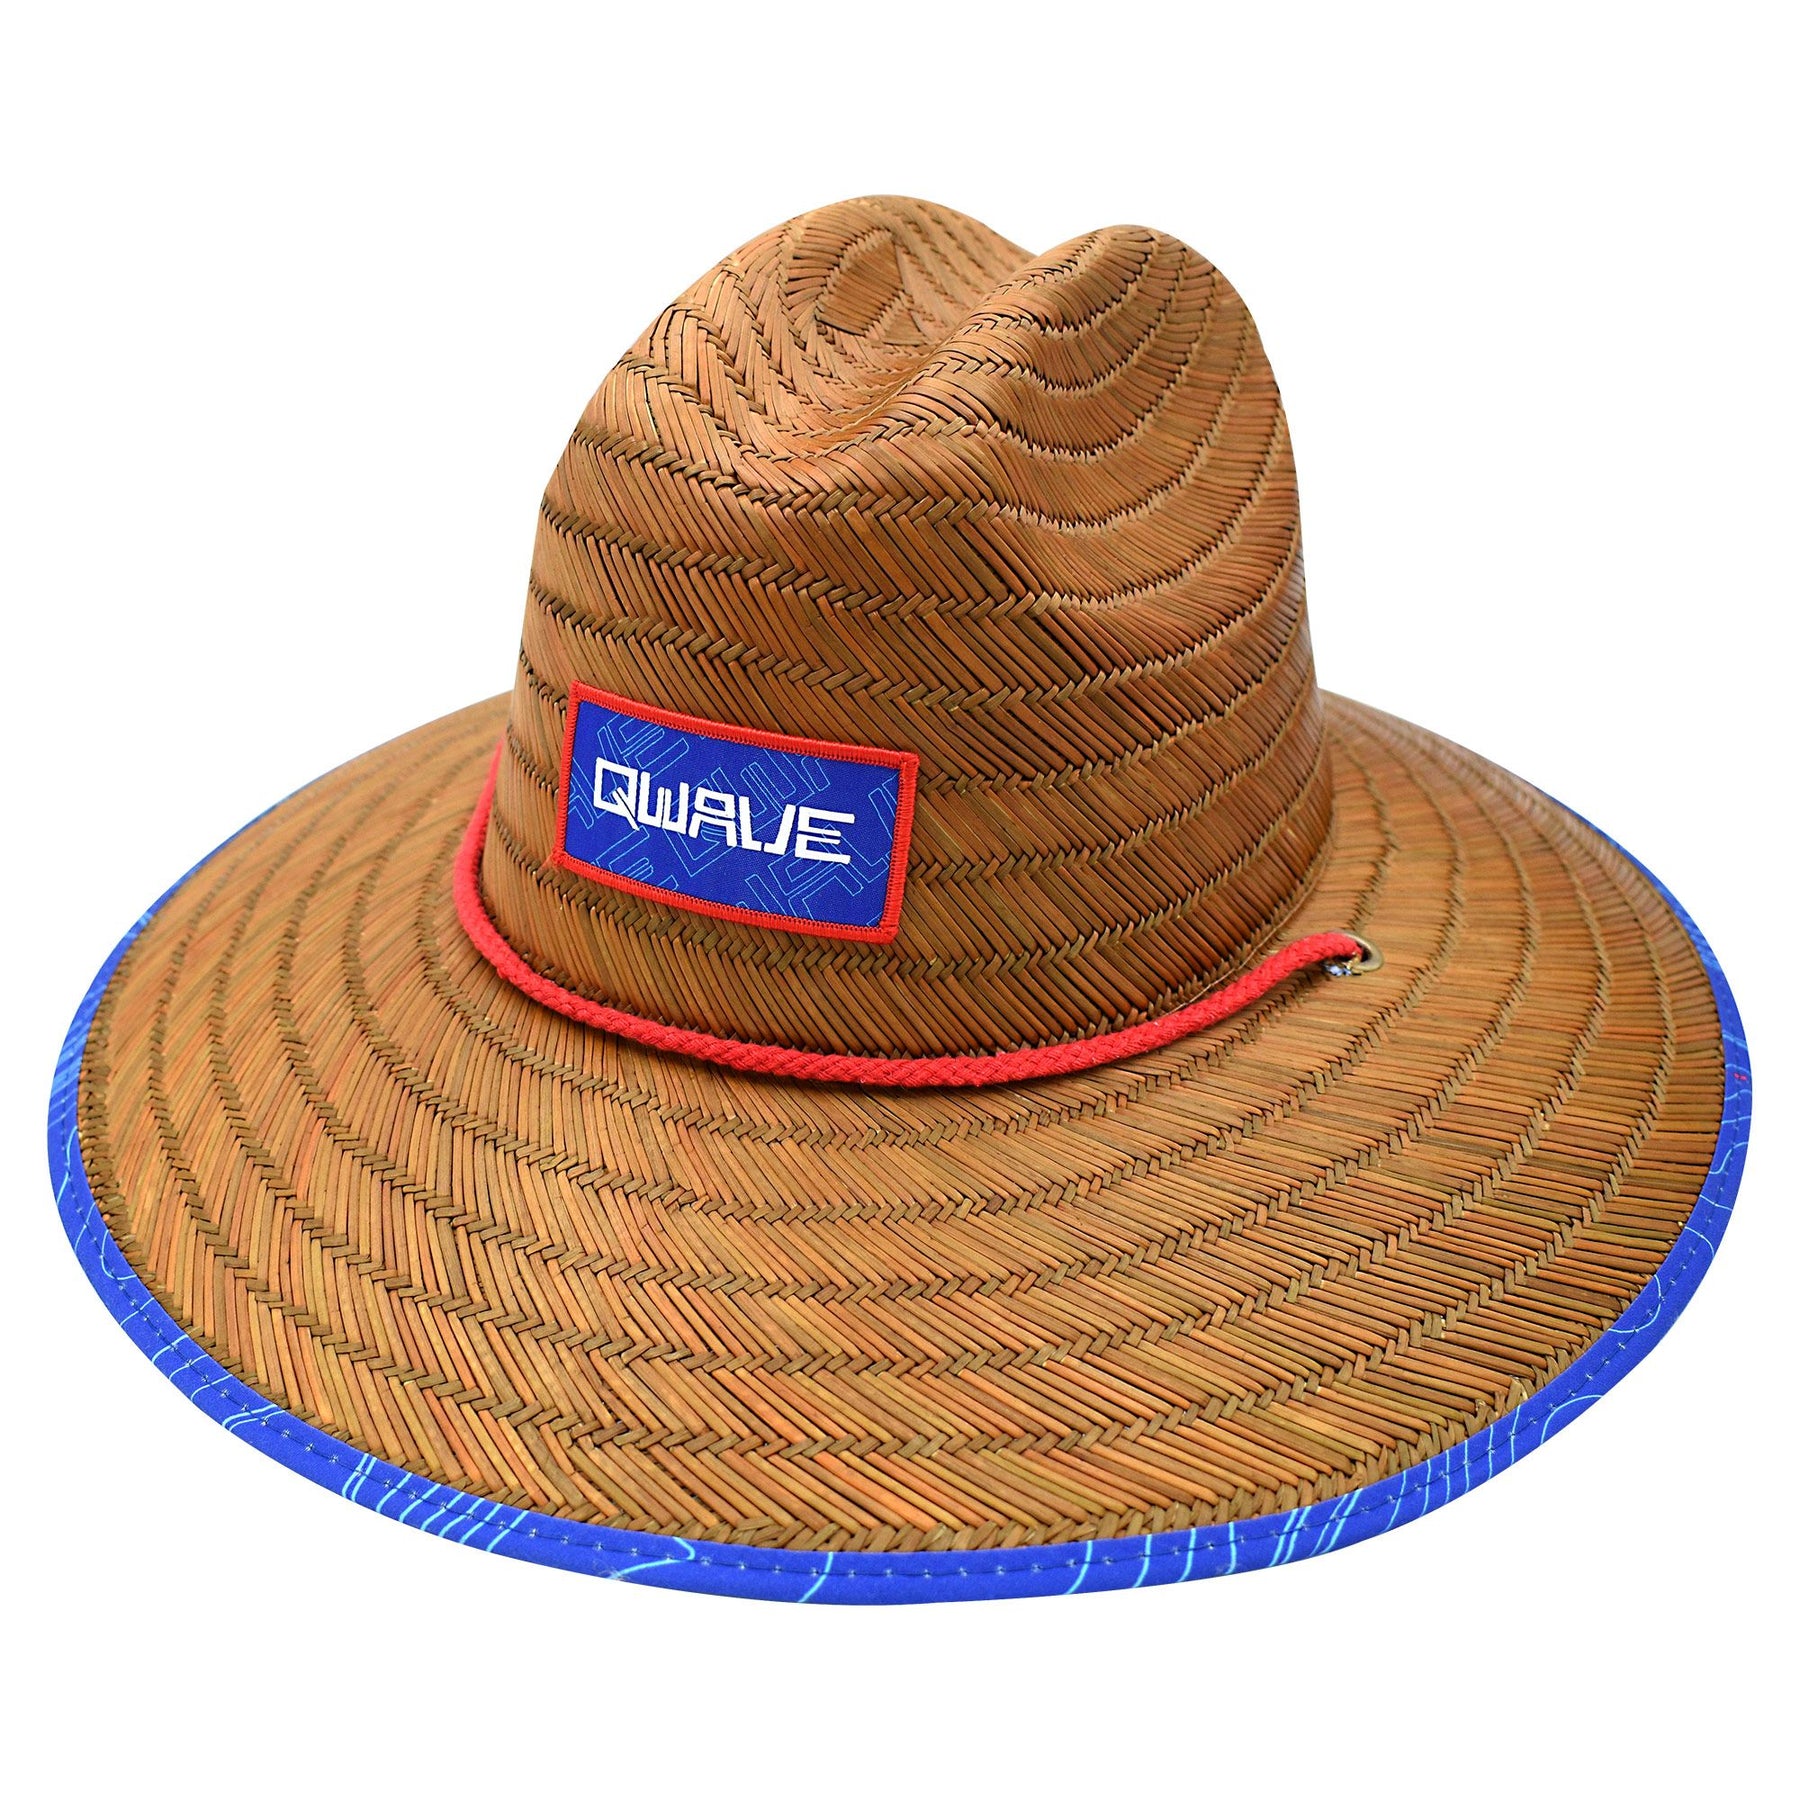 Qwave Mens Straw Hat - Cool Fishing Print Designs, Beach Gear Sun Hats for  Men Protects from Summer Sun - Lifeguard Hat - Topography Print